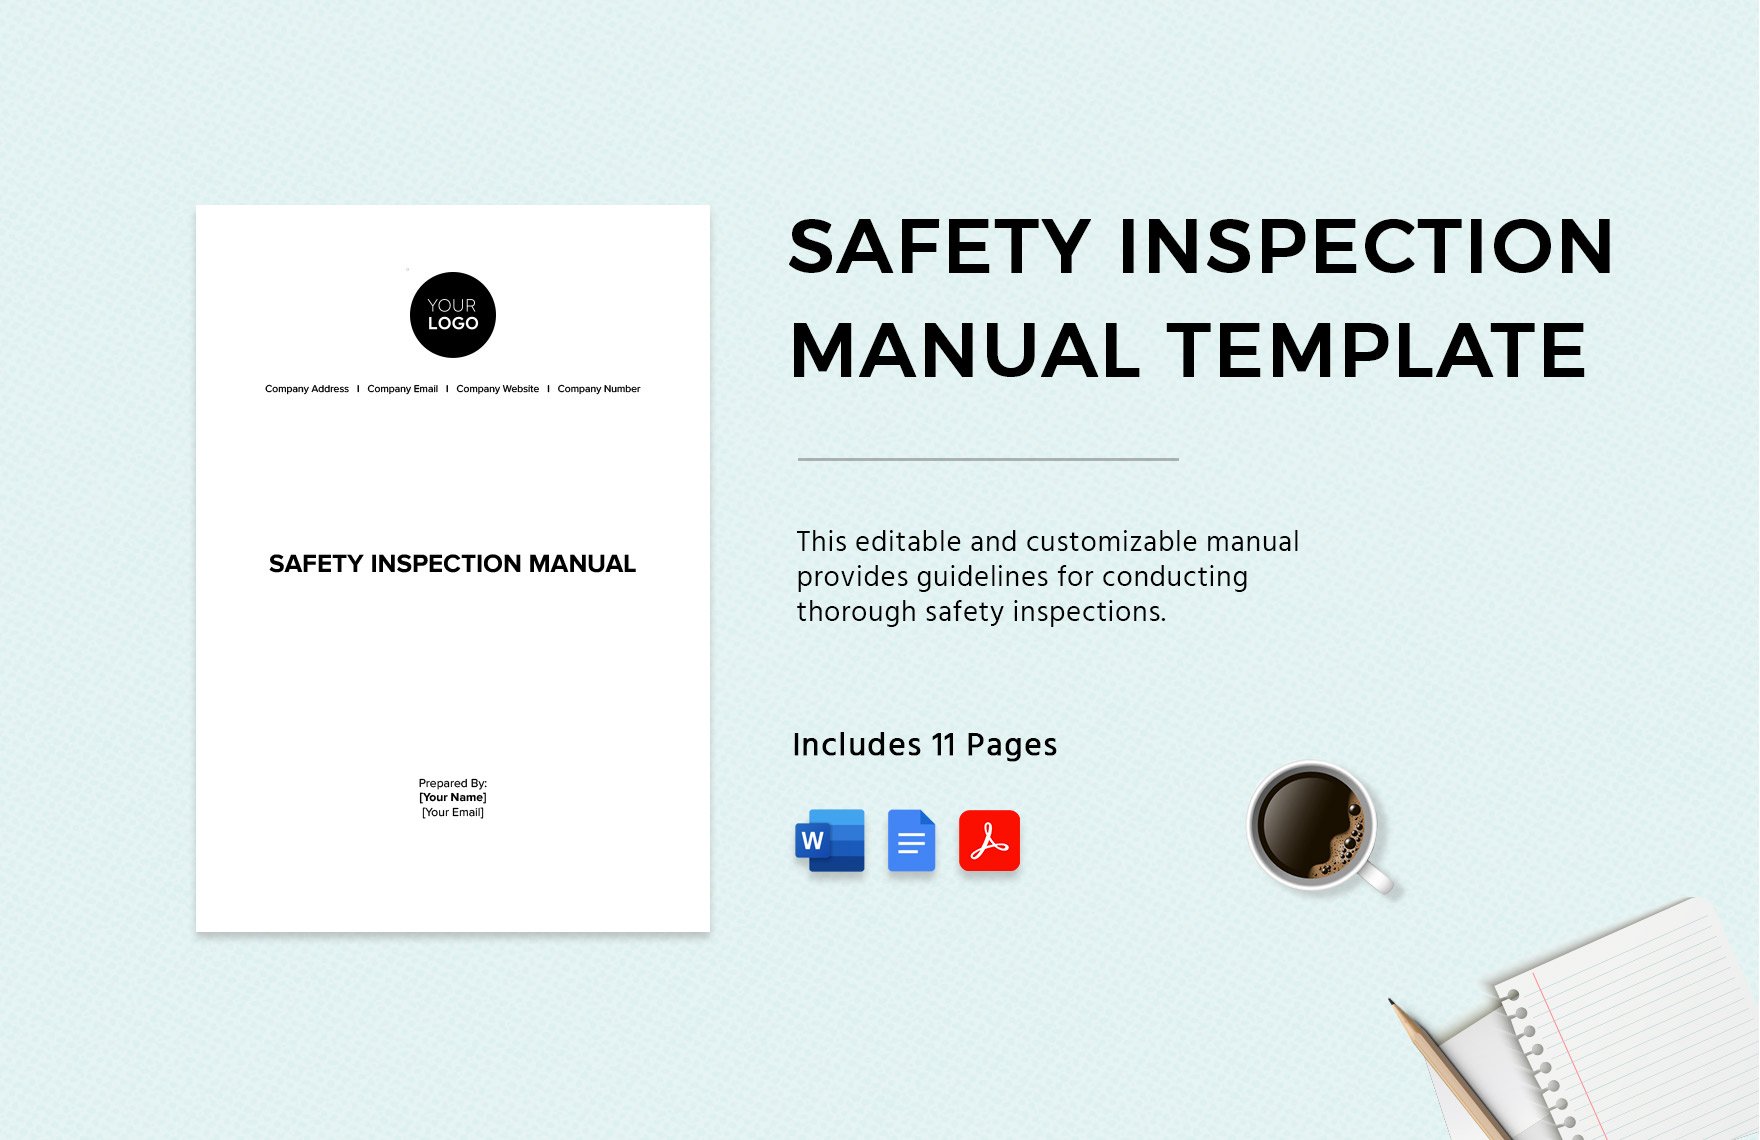 Safety Inspection Manual Template in Word, Google Docs, PDF